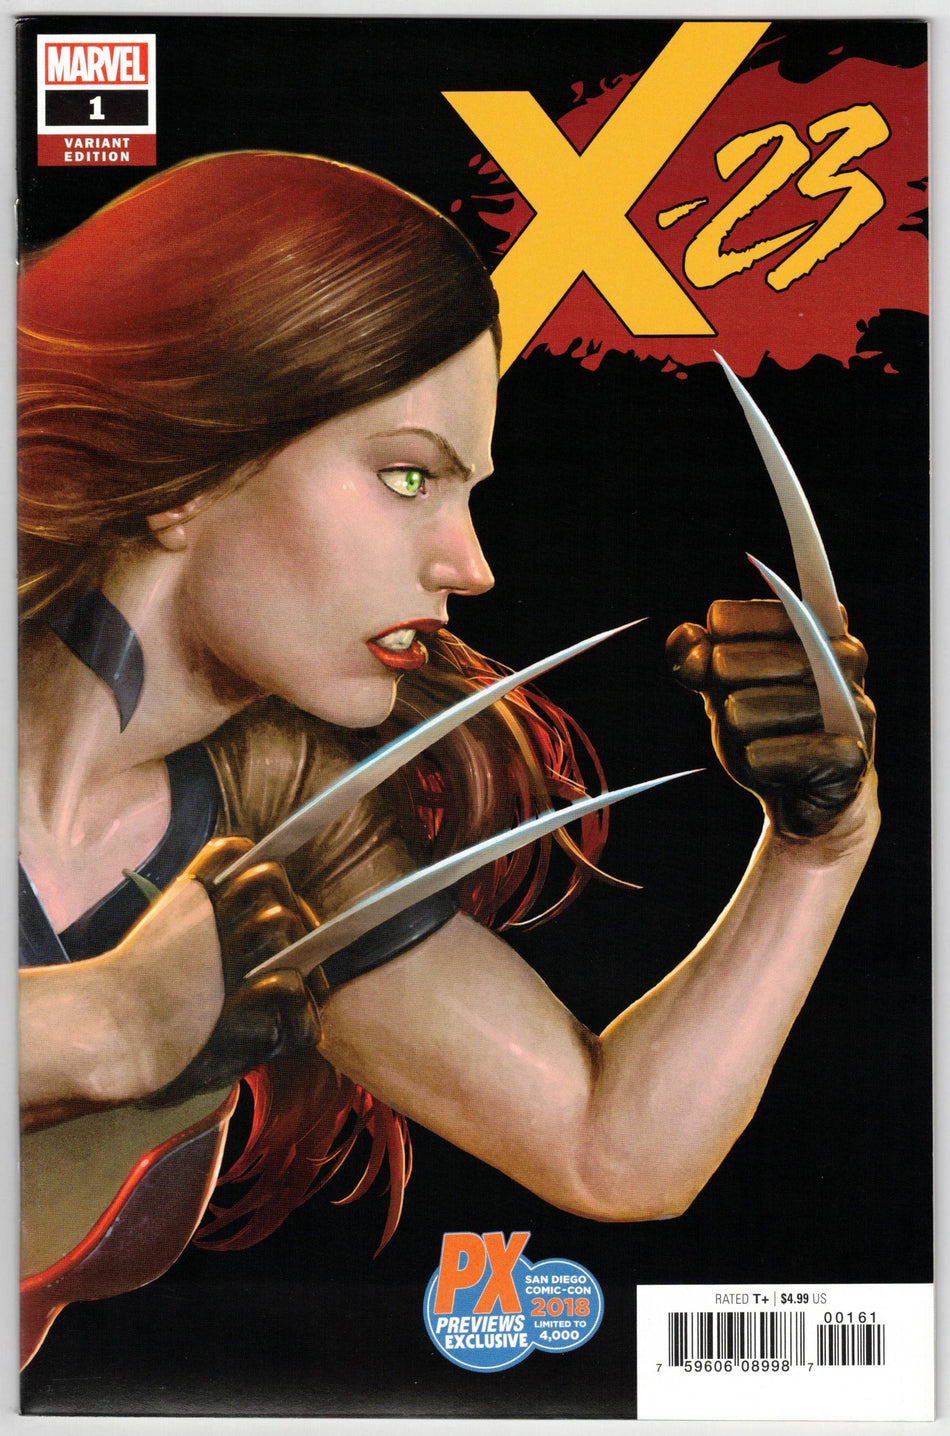 Photo of X-23, Vol. 4 (2018) Issue 1R - Near Mint Comic sold by Stronghold Collectibles